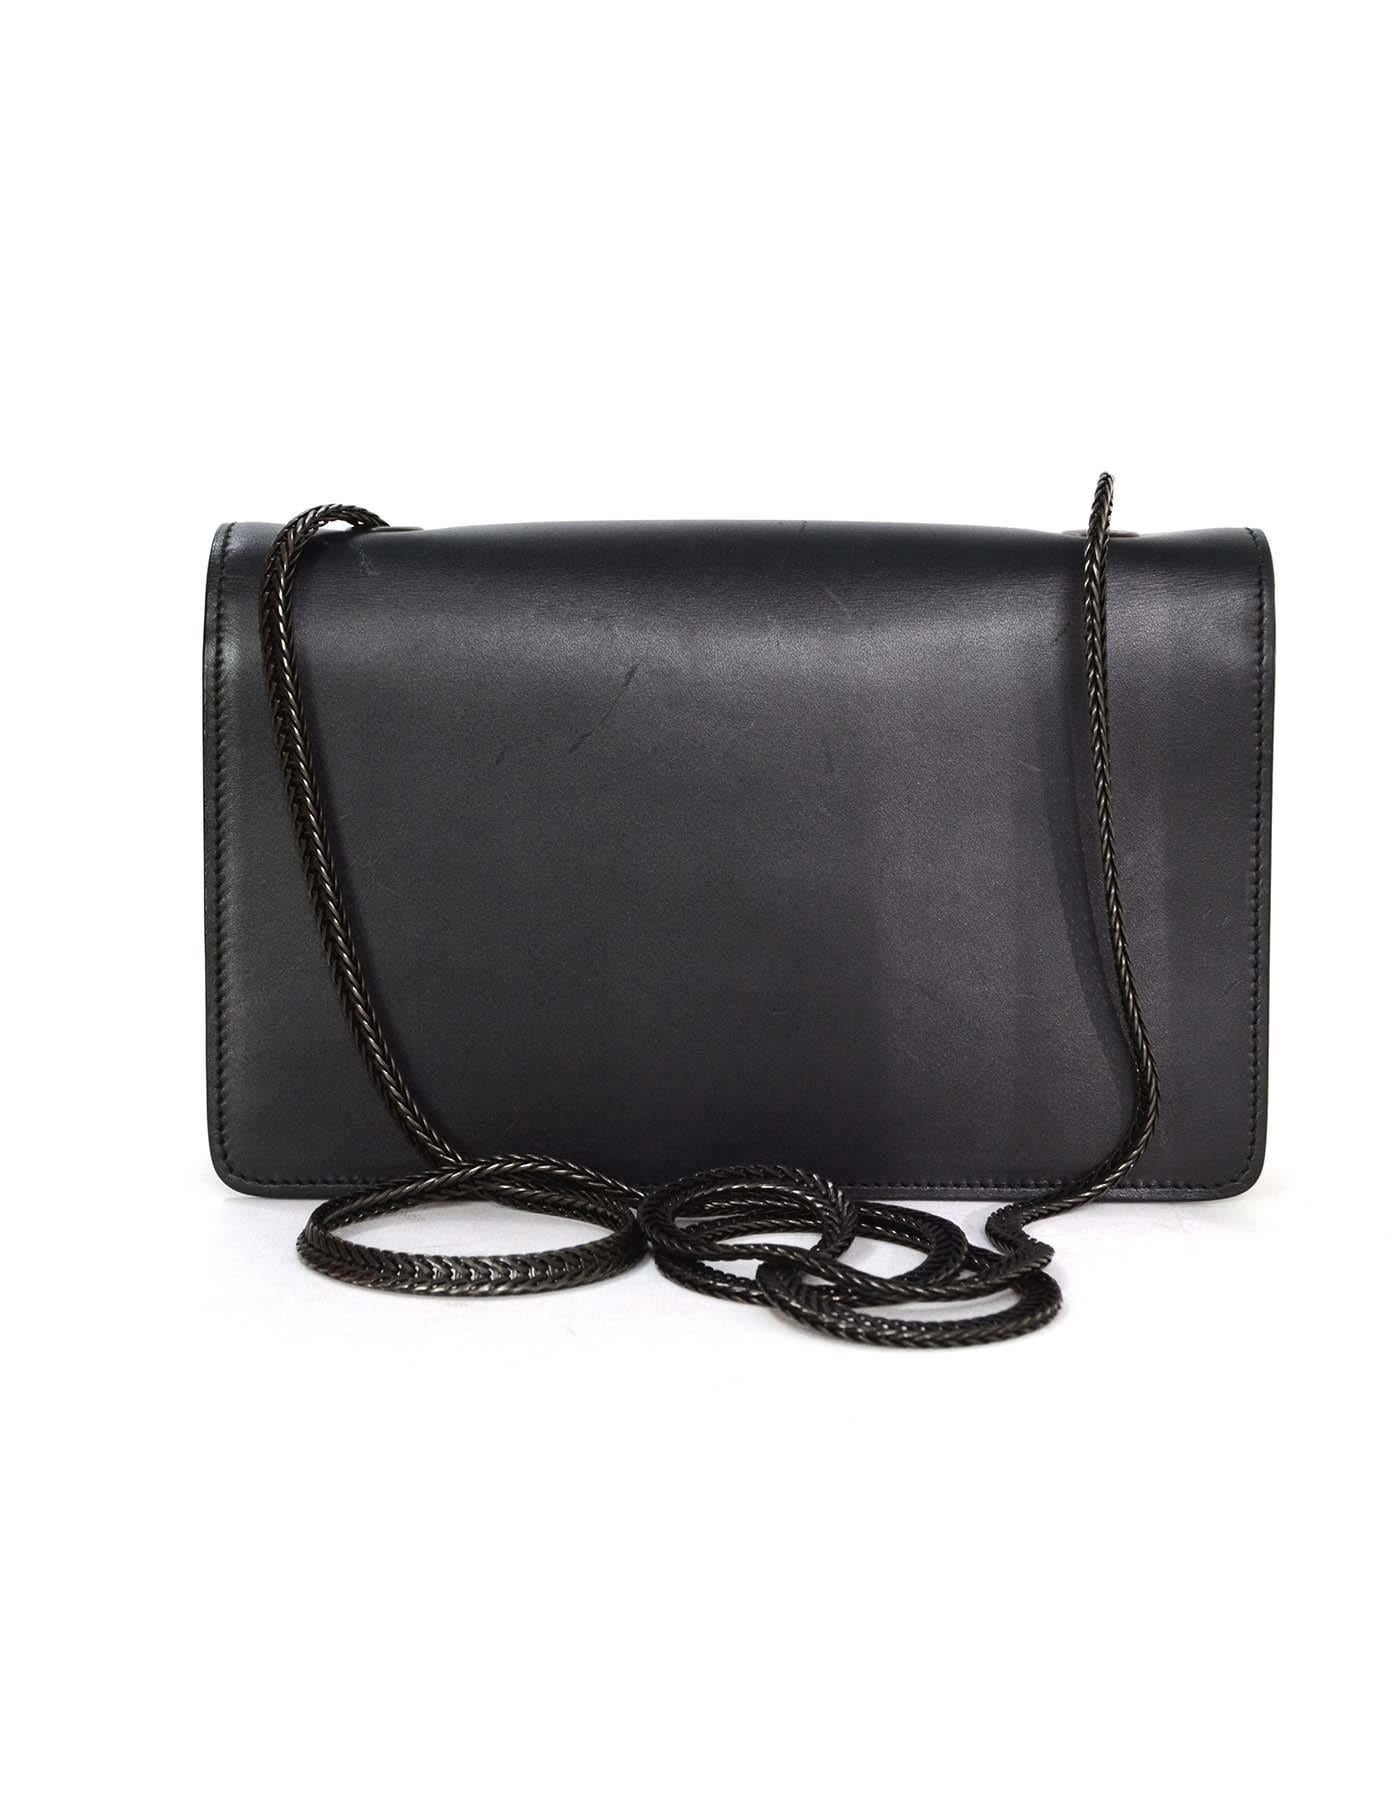 Saint Laurent Black Leather Small 'Betty' Crossbody Bag BHW In Excellent Condition In New York, NY